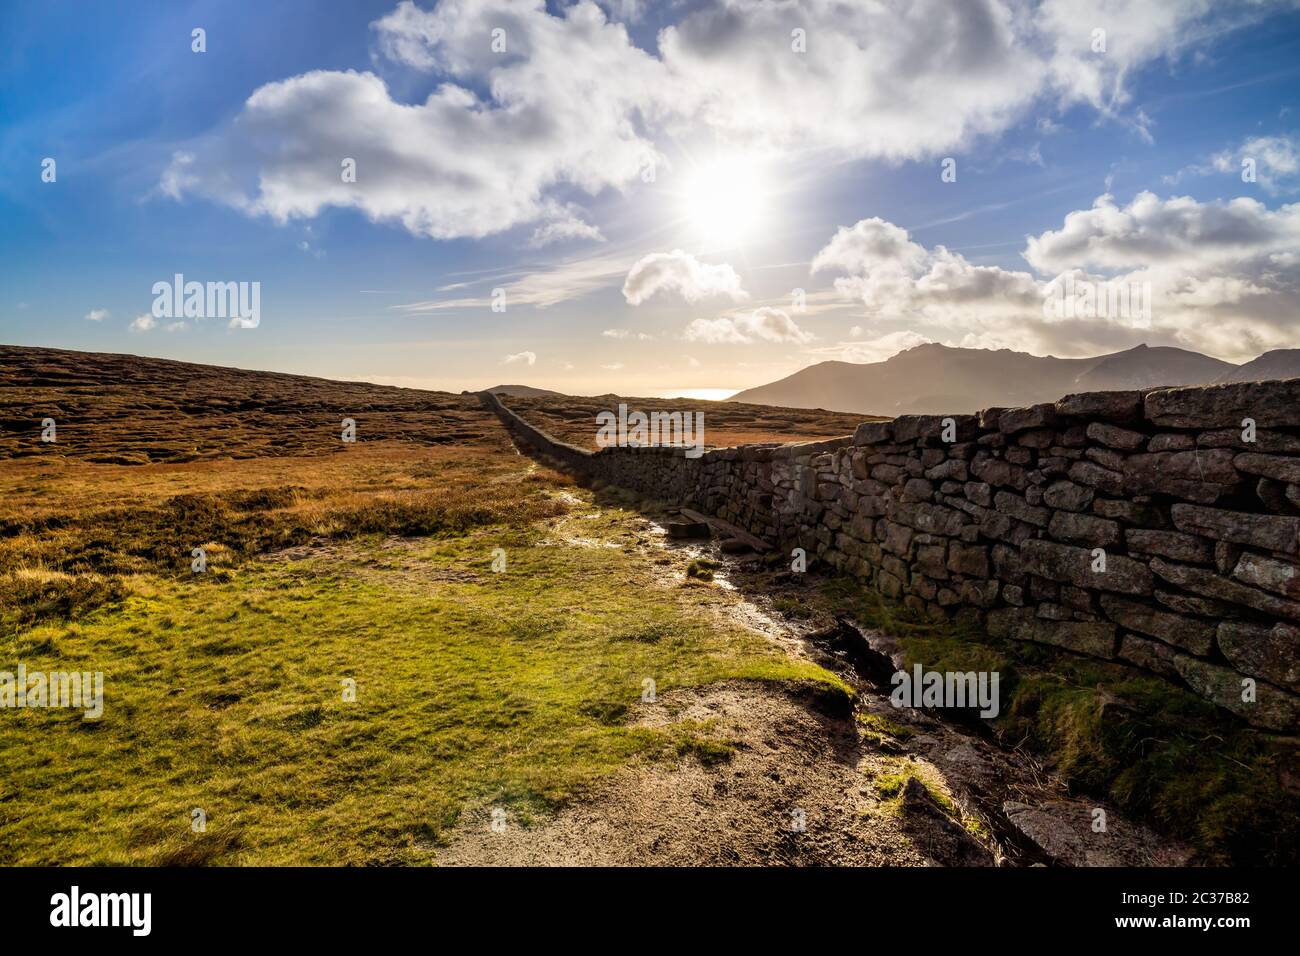 Mourn Wall on the bank of Slieve Donard mountain with blue sky, white clouds and sunrays. Stock Photo